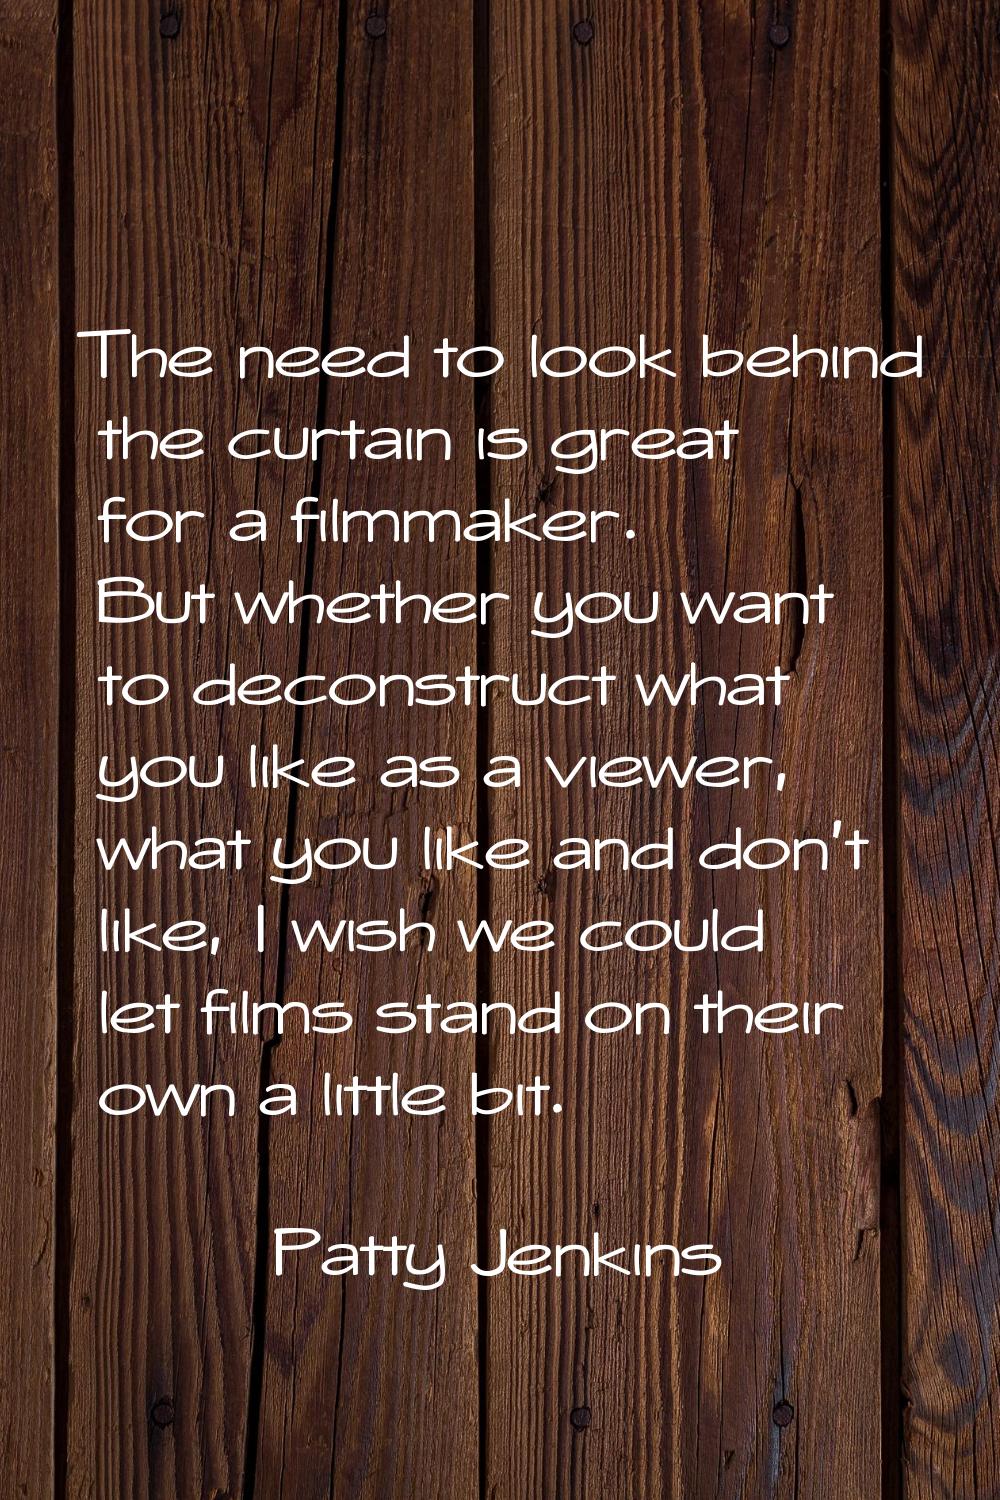 The need to look behind the curtain is great for a filmmaker. But whether you want to deconstruct w